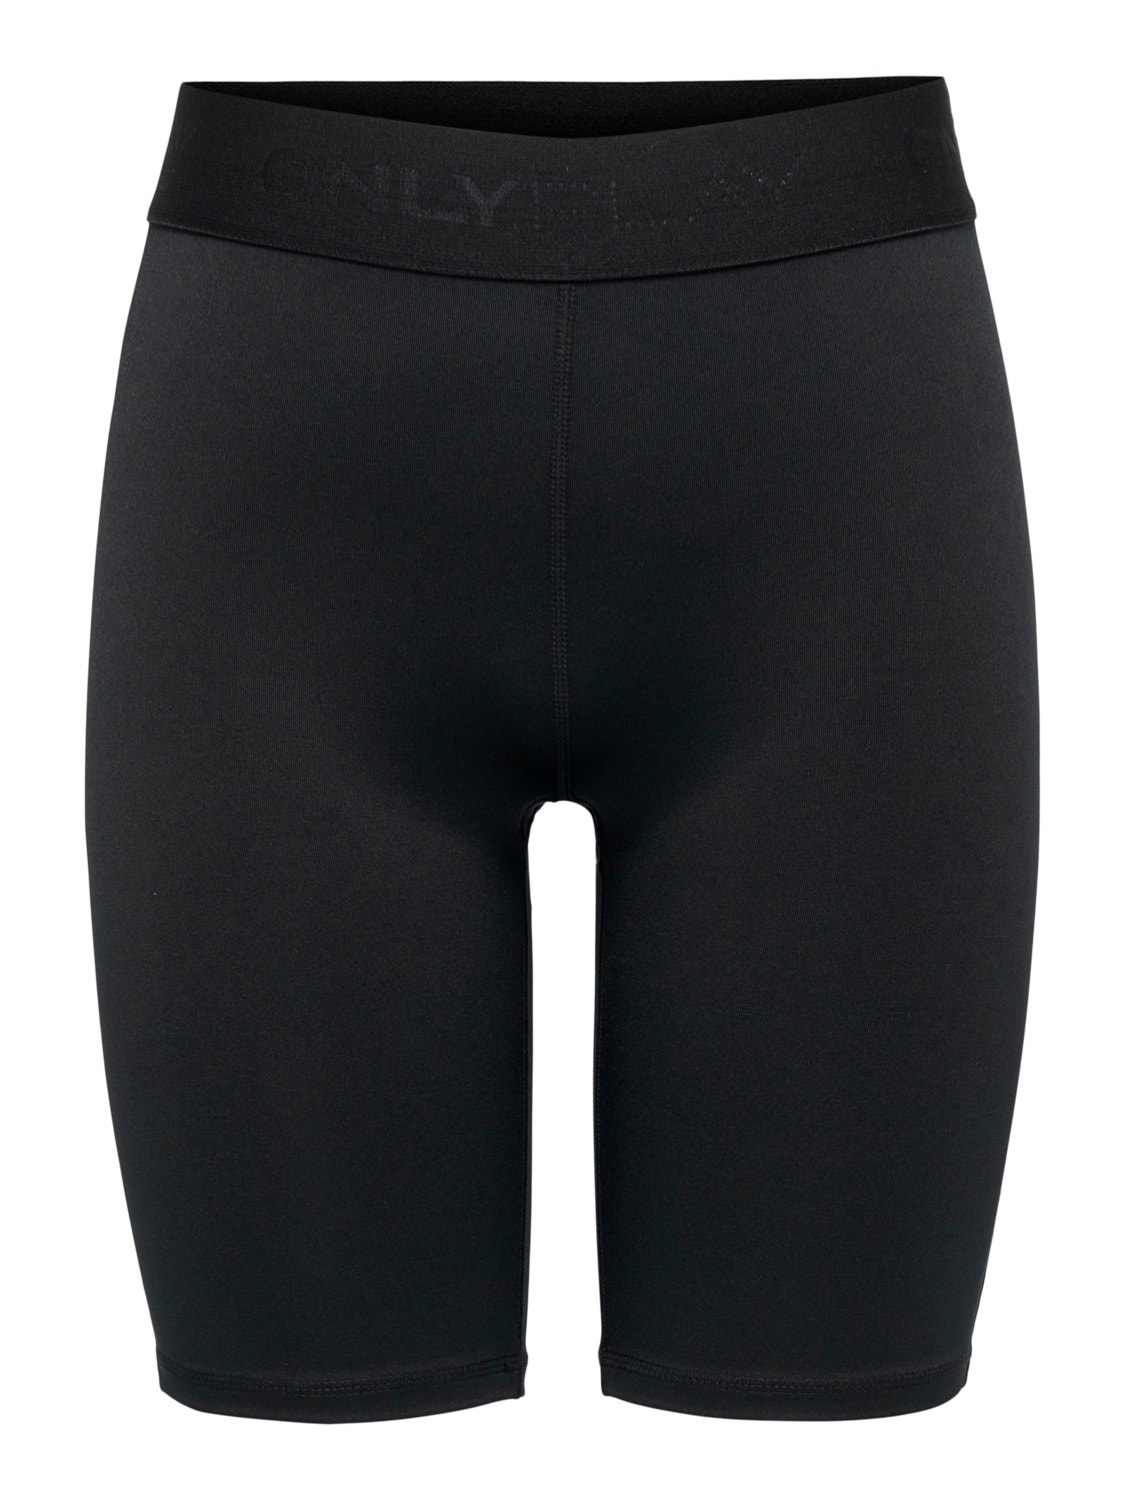 ONLY Midwaist Tight Fit Shorts -Black - 15287822